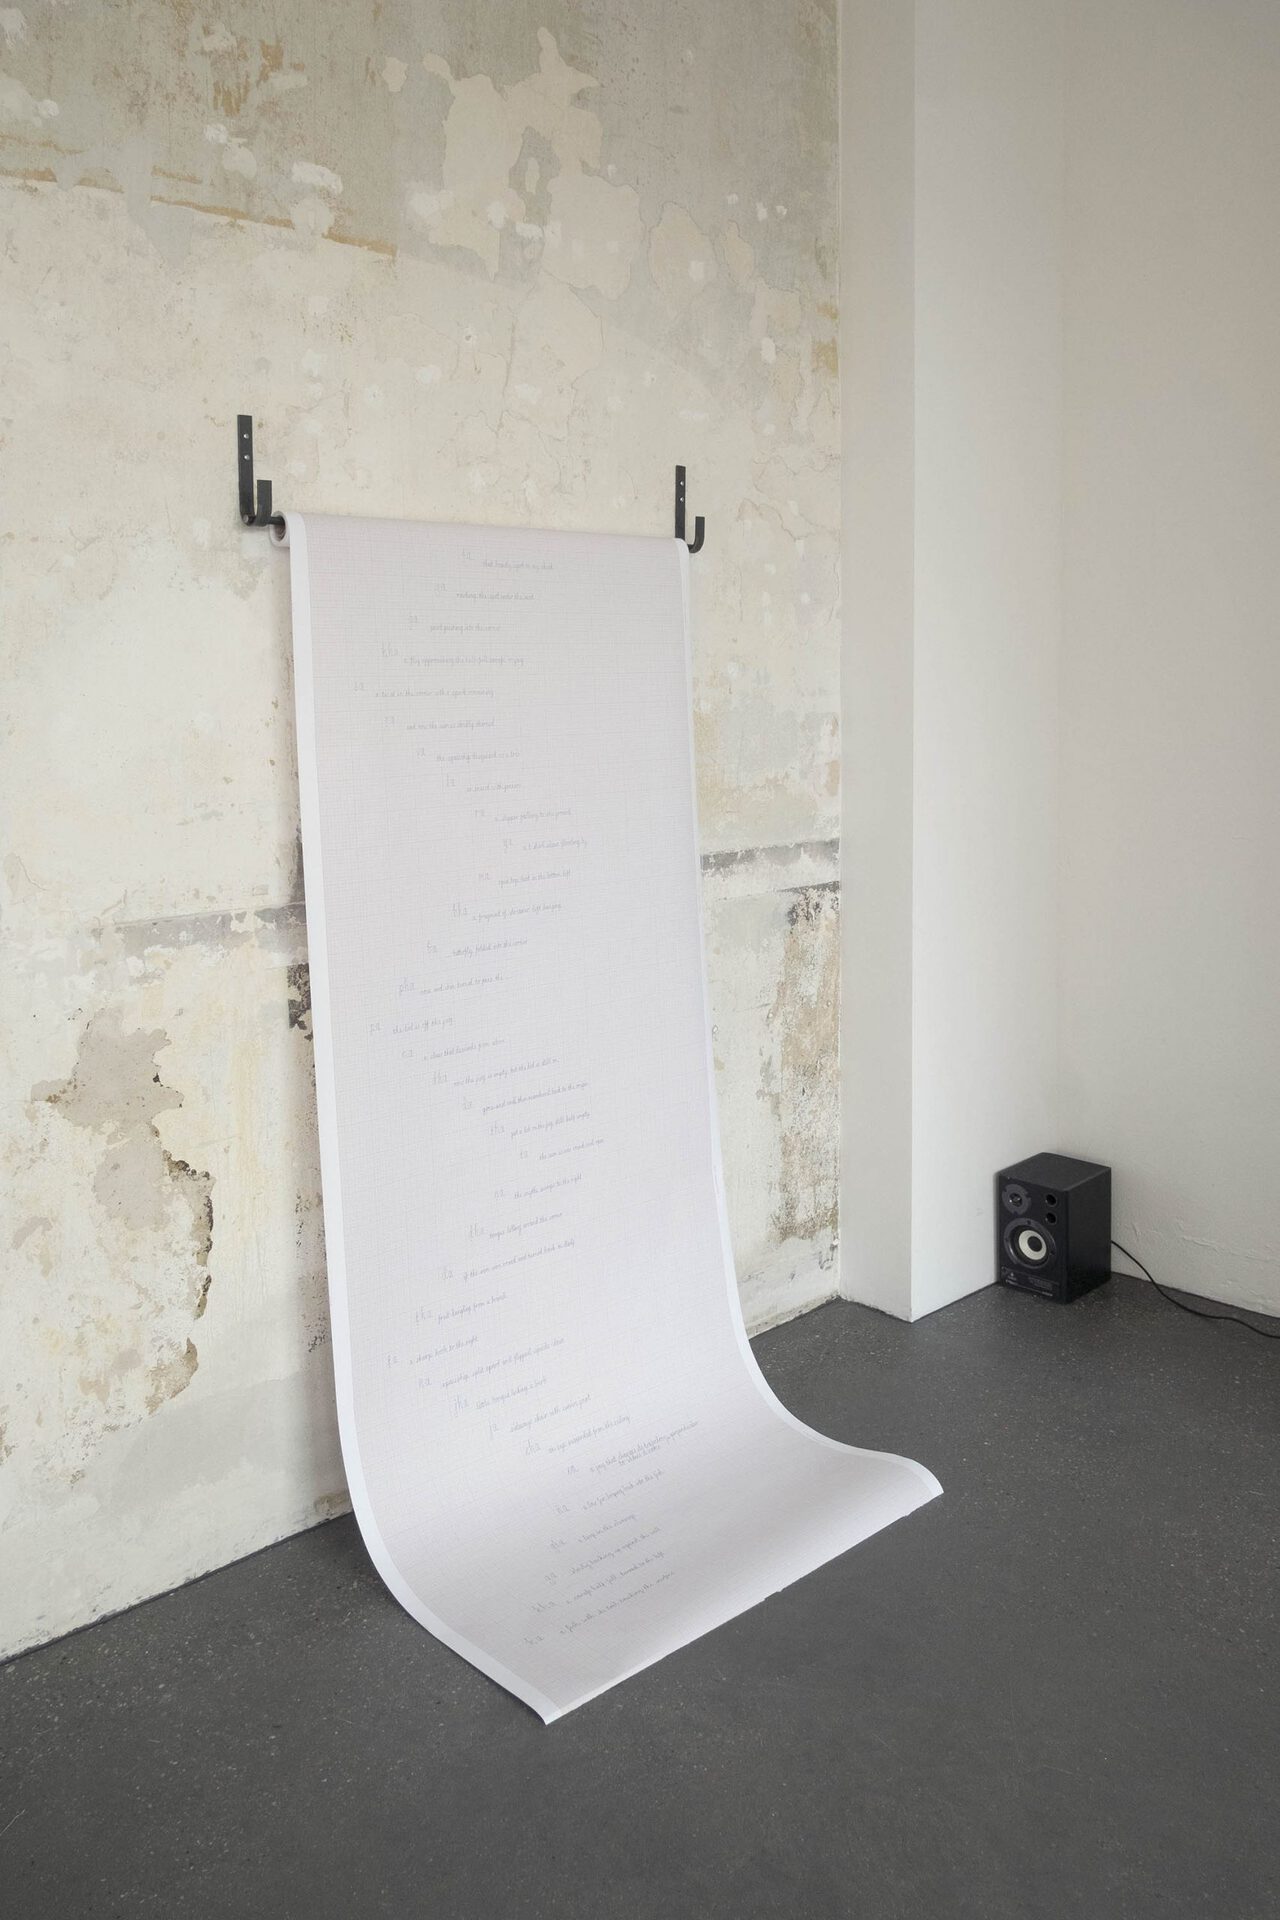 Miriam Stoney, Corpus of Unknowing, 2021, millimetre graph paper, writing, metal frame